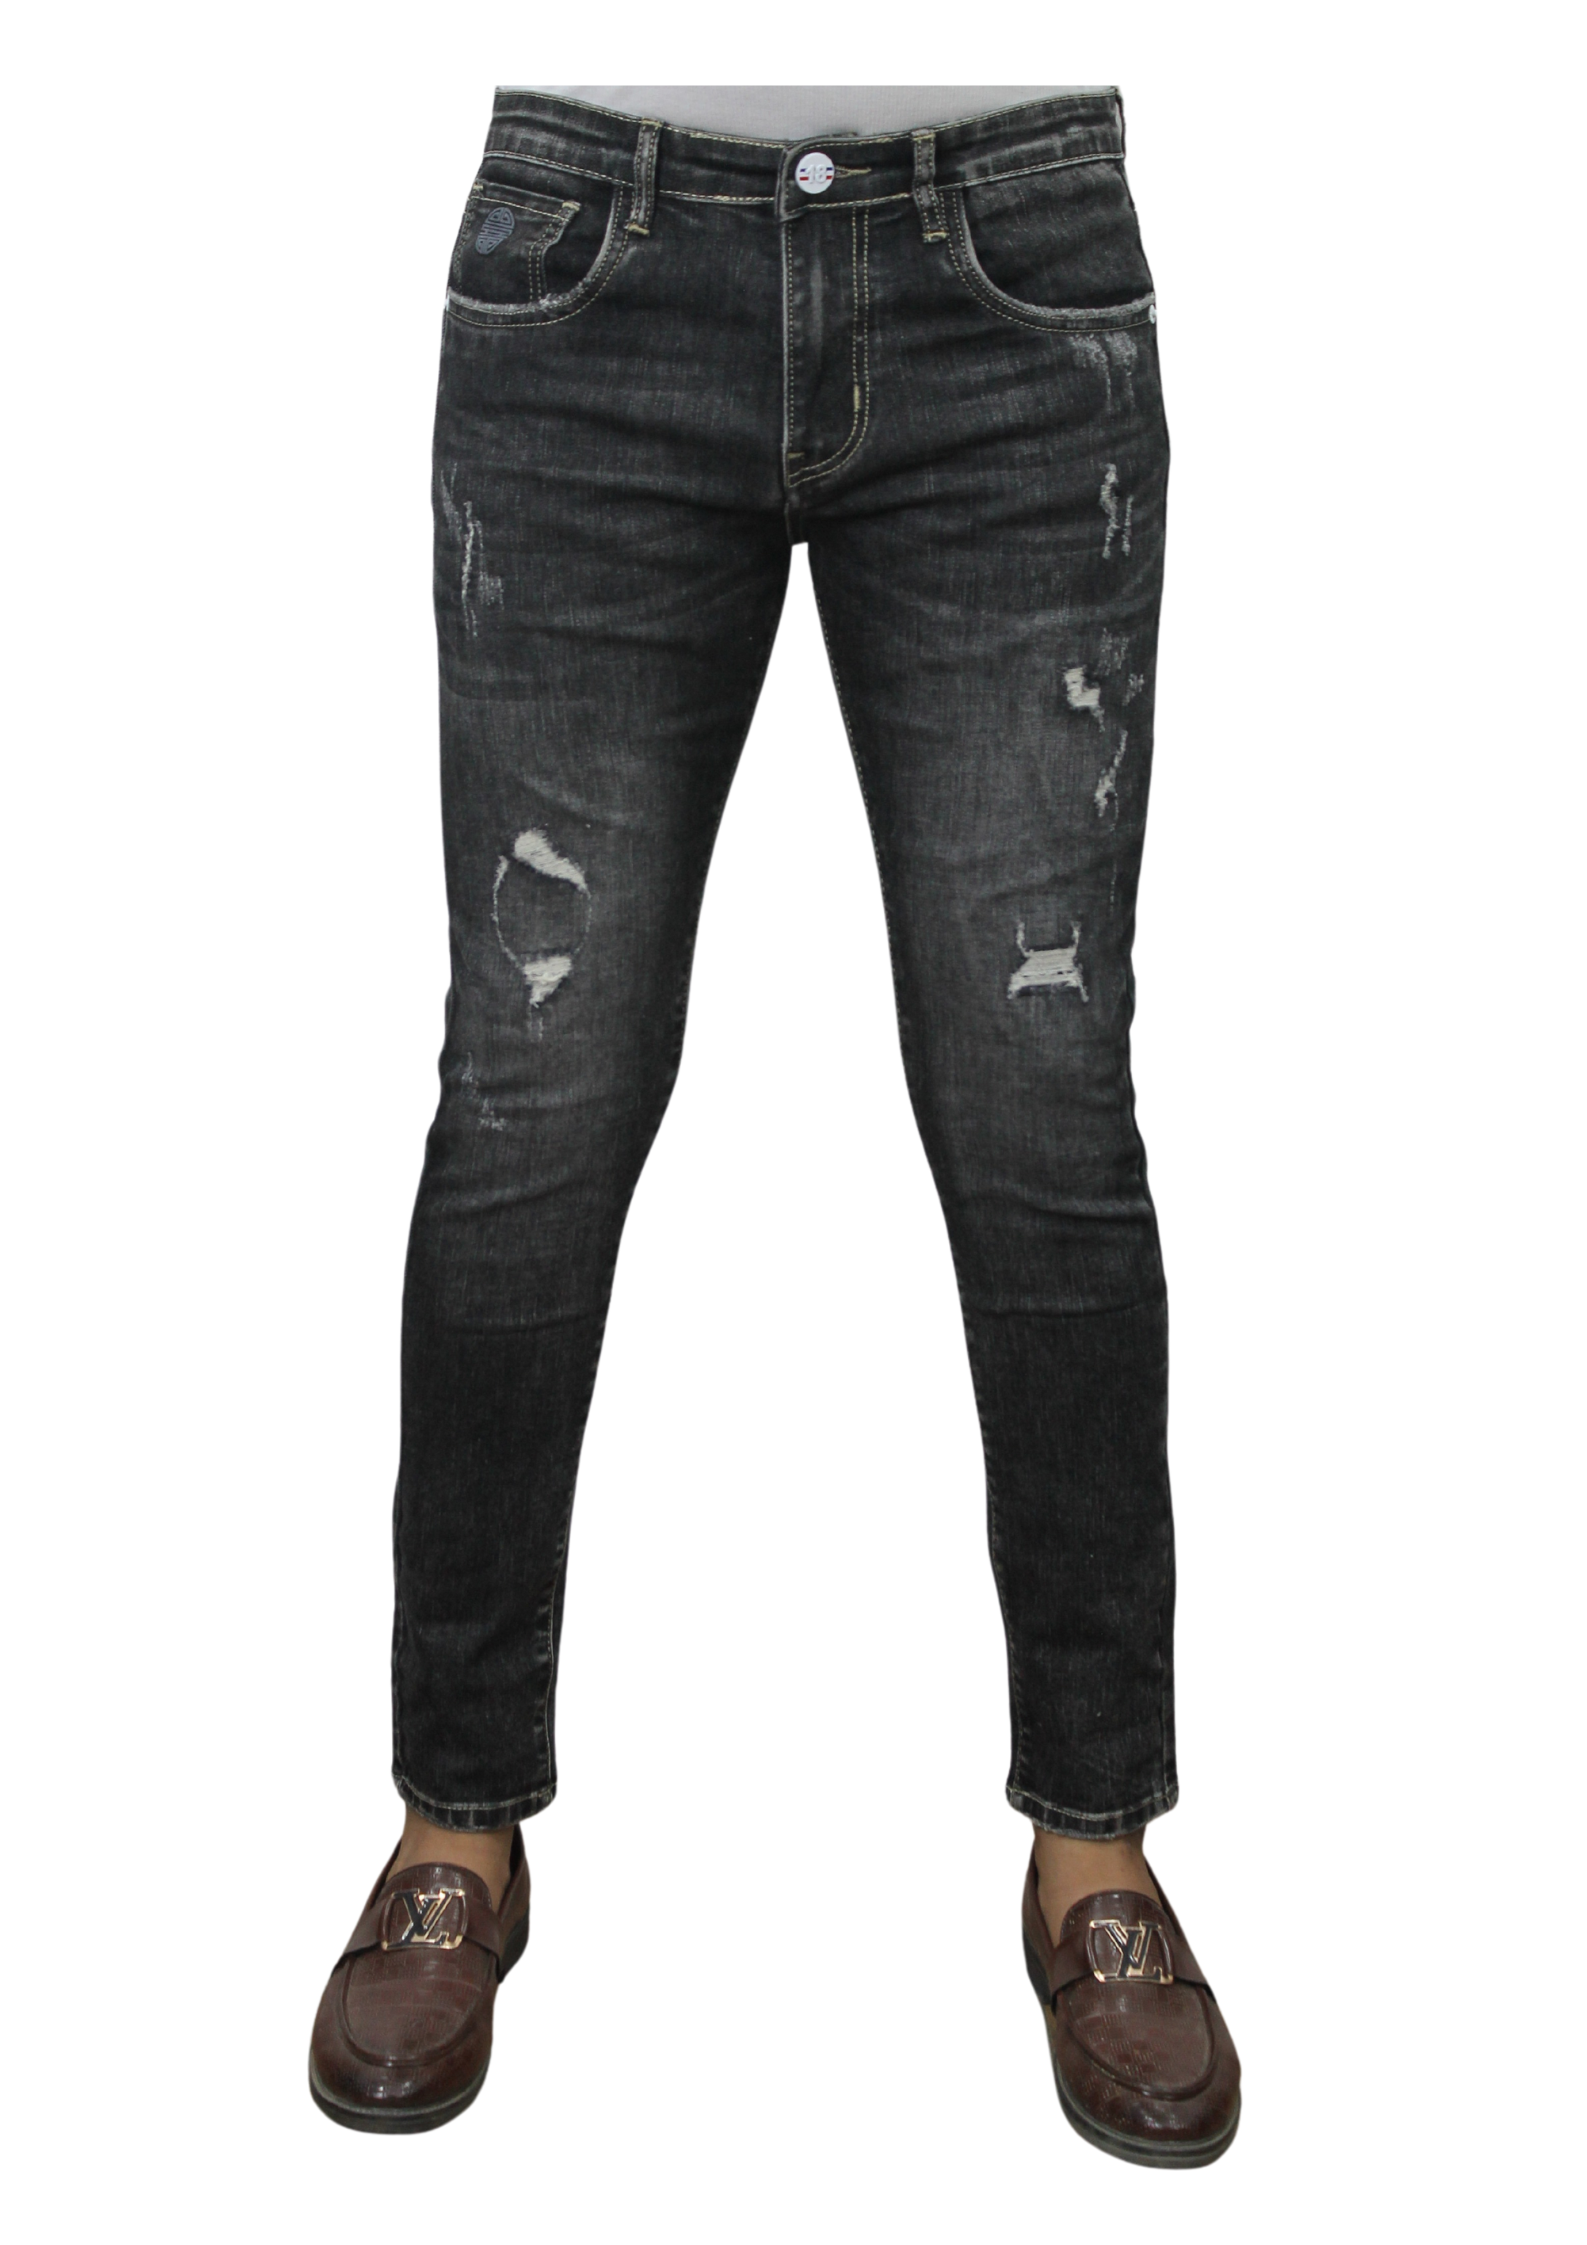 Graphit Gray Dark Ankle Fit Funky Denim Jeans